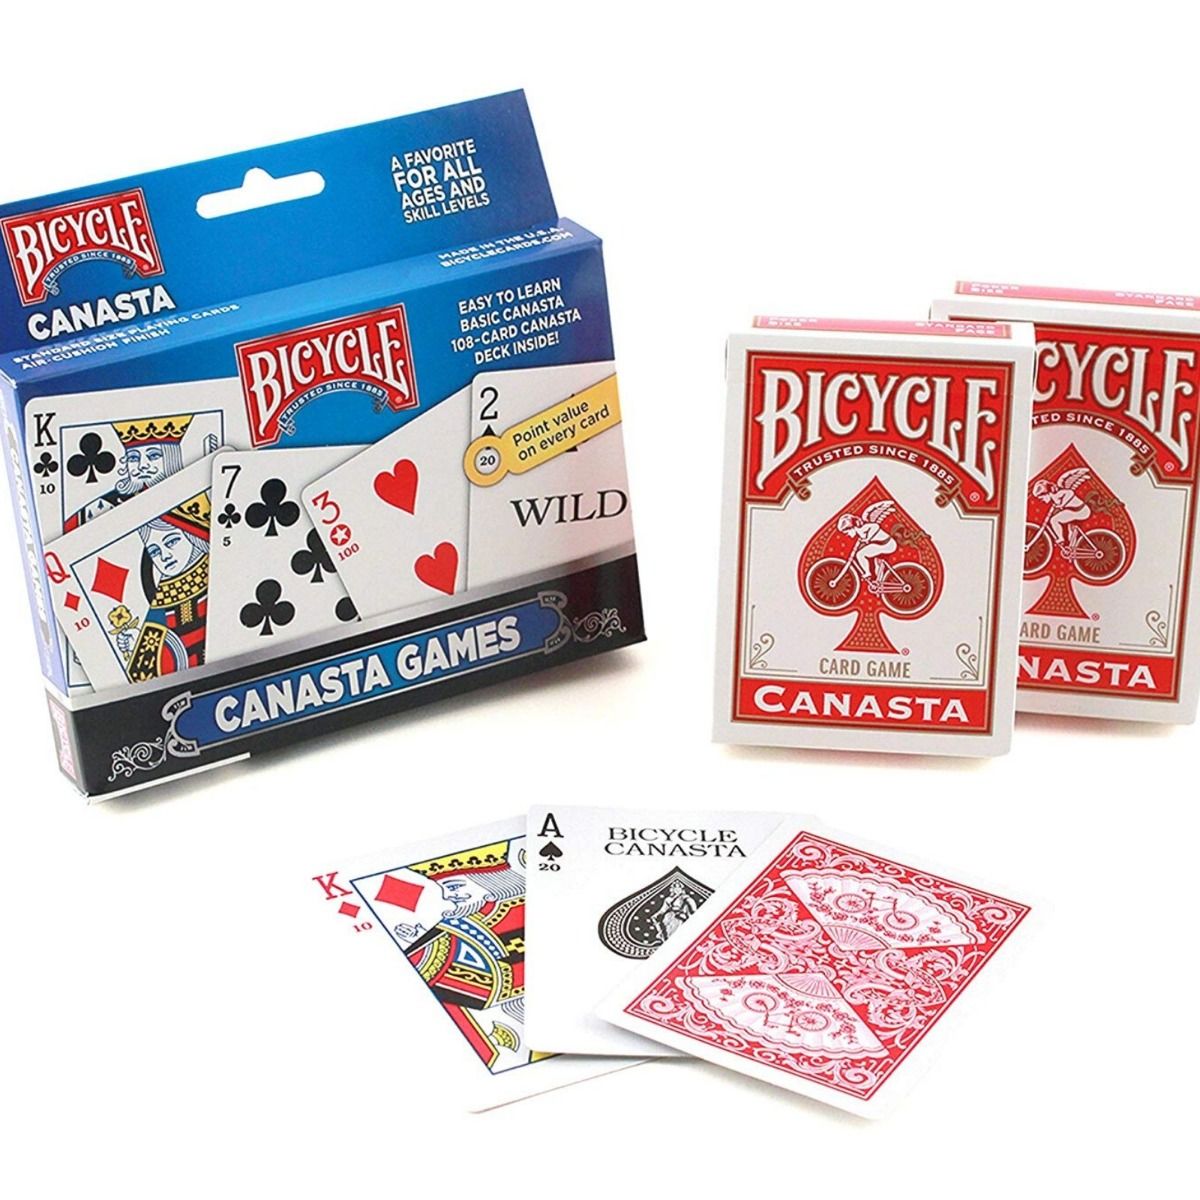 Bicycle Games - Canasta